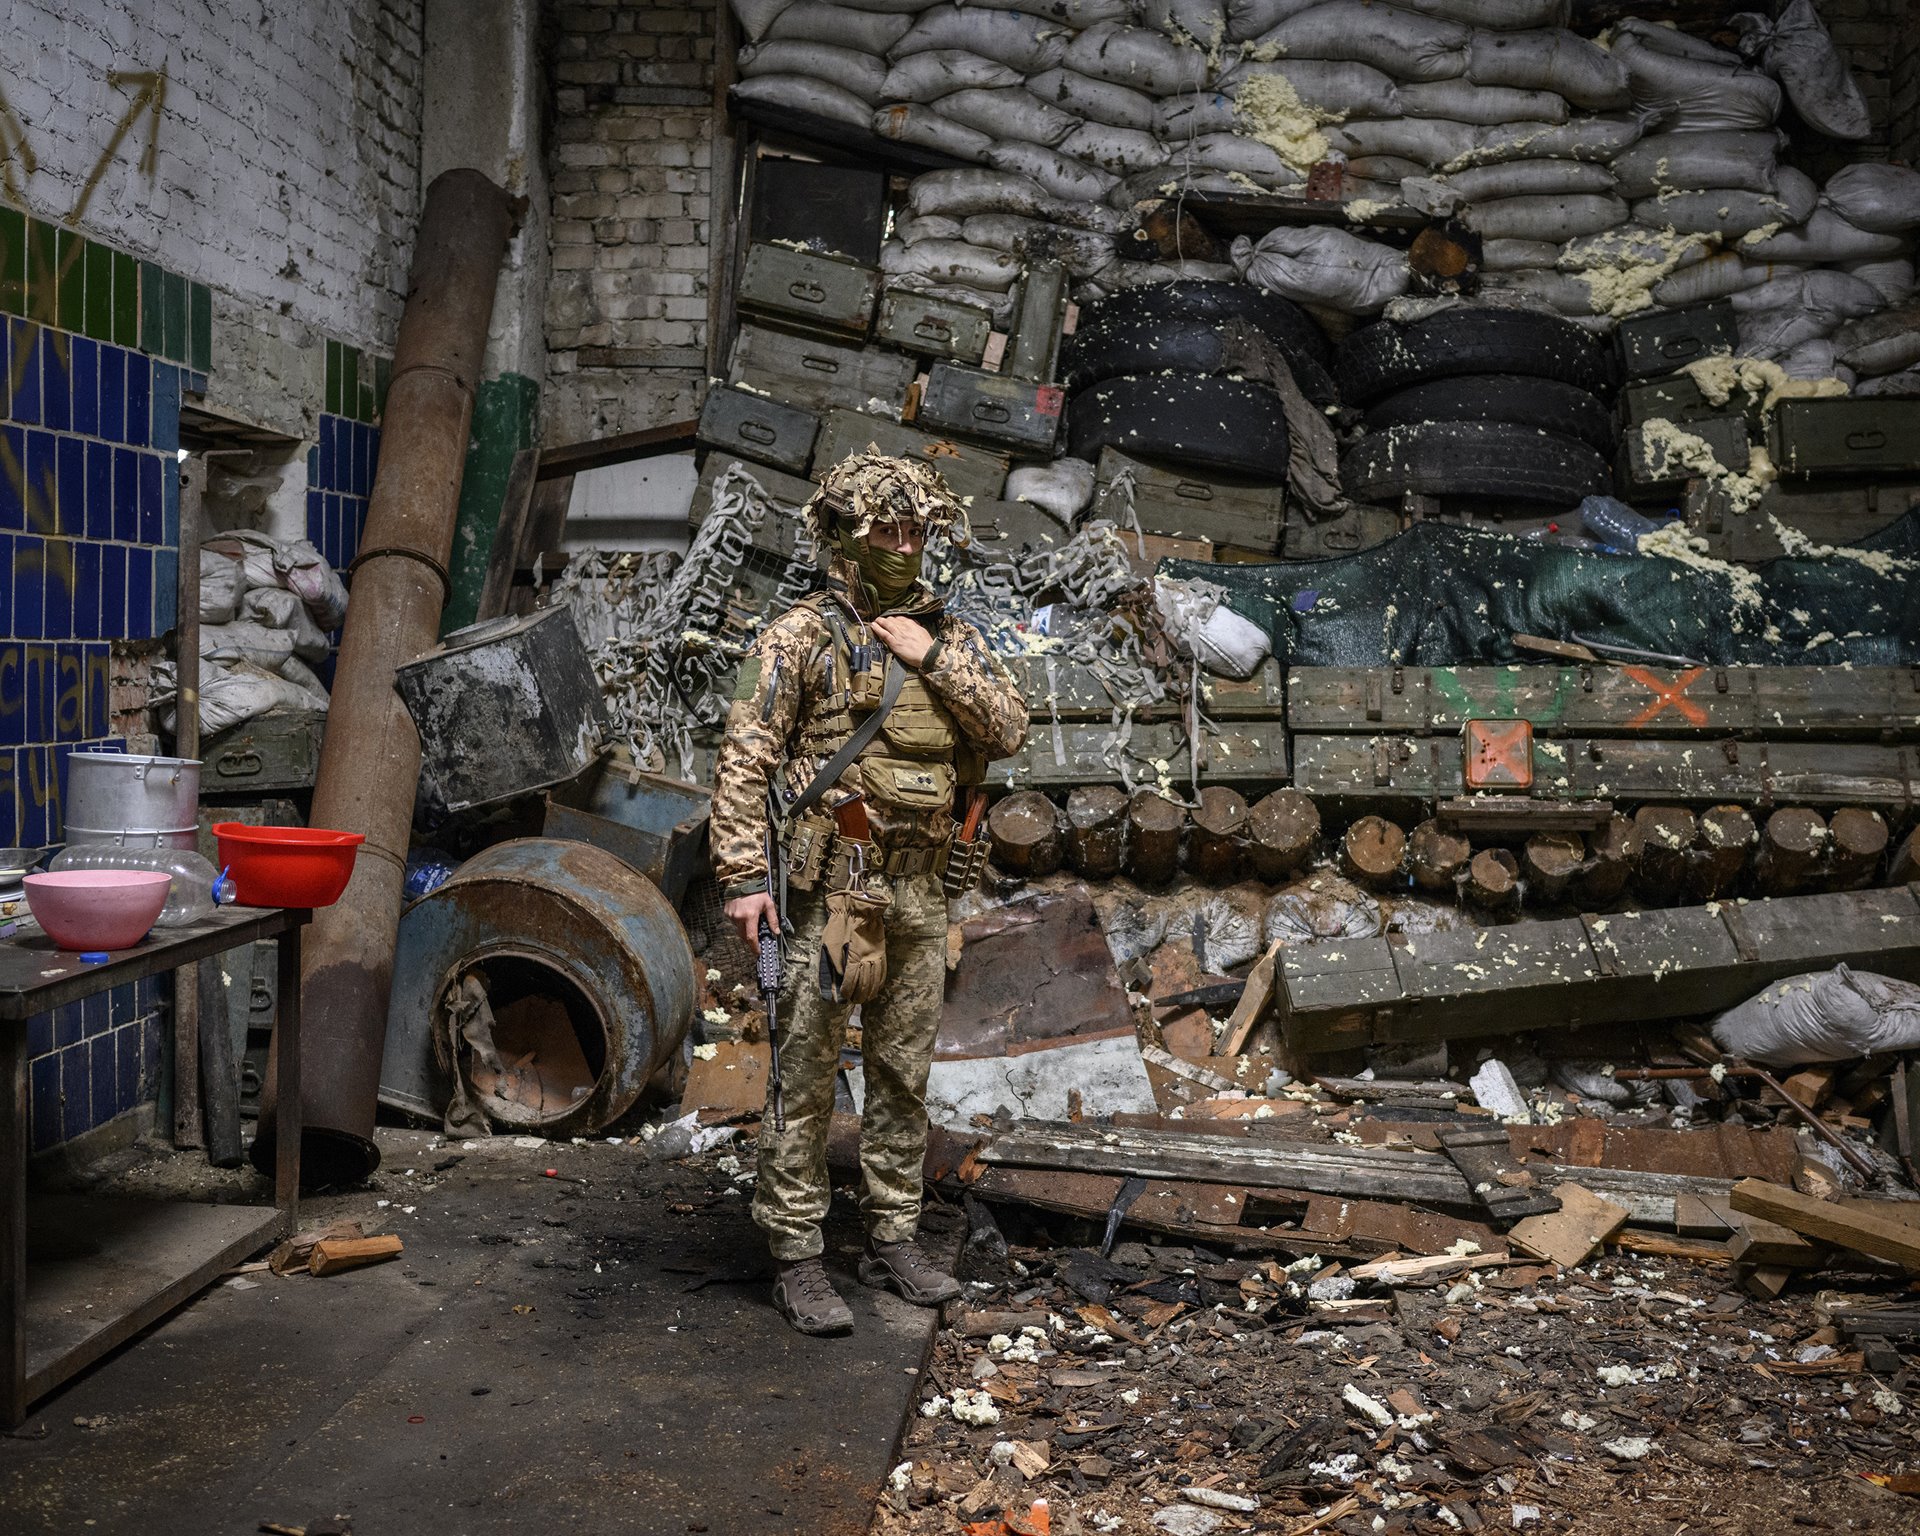 A Ukrainian soldier stands beside a barrier made with sandbags and old ammunition boxes in a building in the Promzona industrial zone, in the town of Avdiivka, in Donbas, Ukraine. The Promzona industrial zone was seen as strategically significant, as it provided control over the M04 highway, which was the most direct transport route between the separatist HQ in Donetsk and Horlivka, another large frontline city.